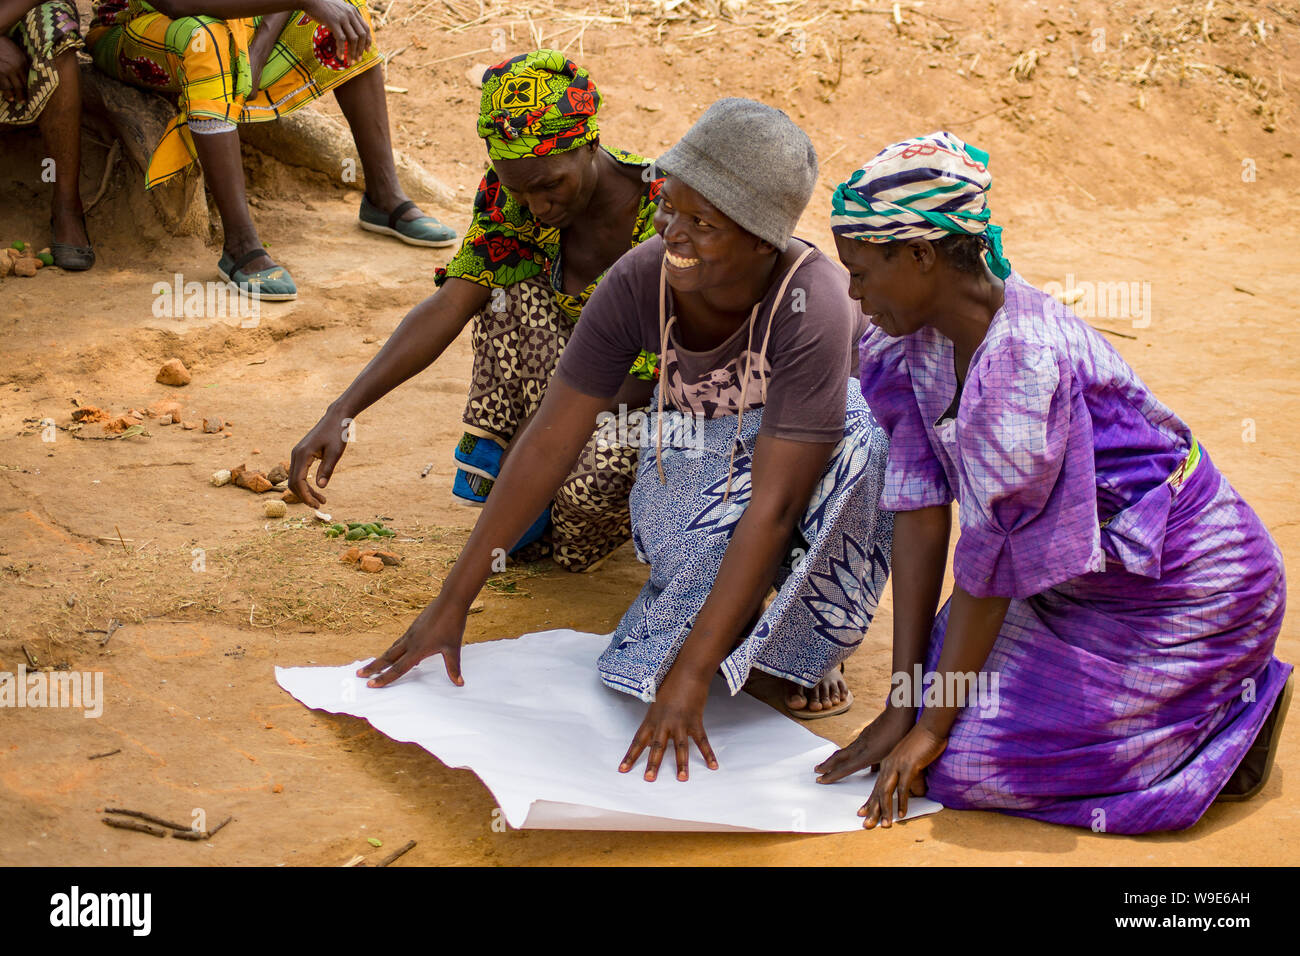 Women farmers near Kasama, Zambia, engaging in participatory research on livelihood security Stock Photo